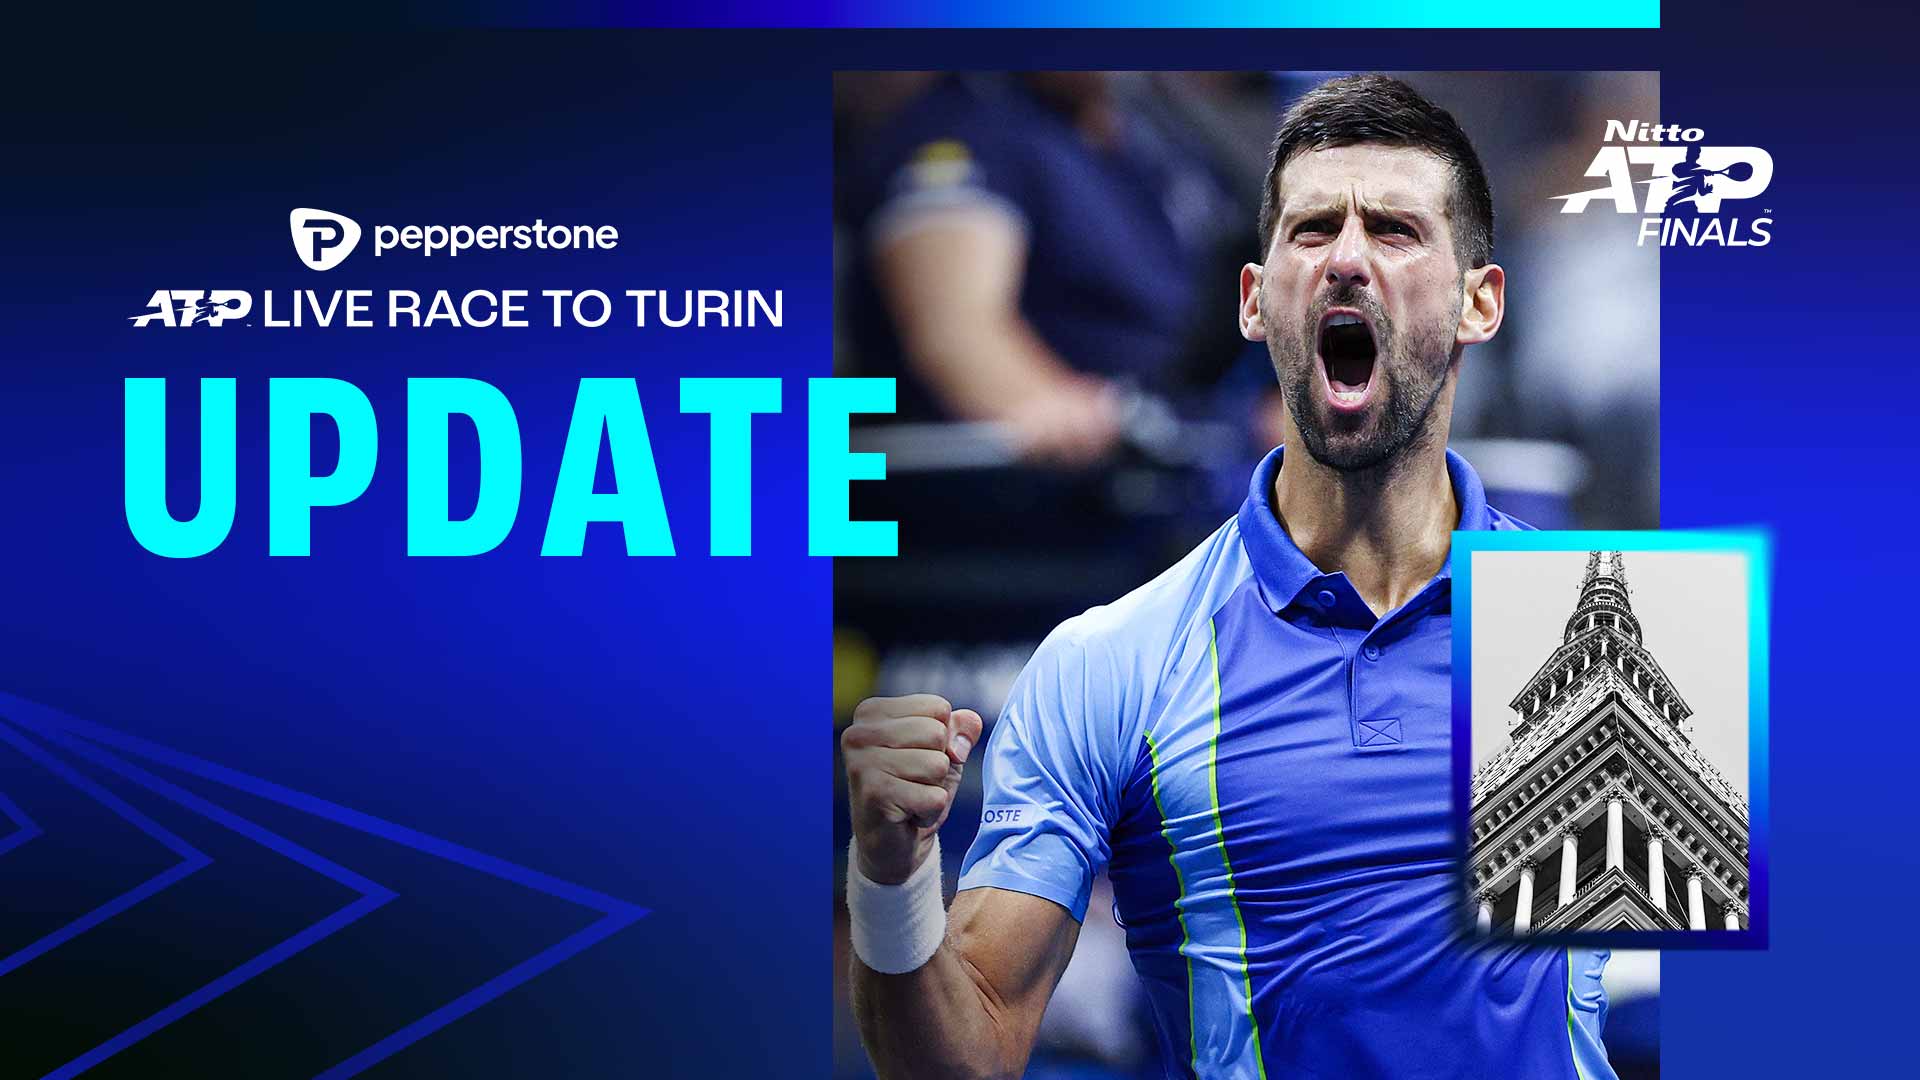 Novak Djokovic moves to first in the Pepperstone ATP Live Race To Turin.